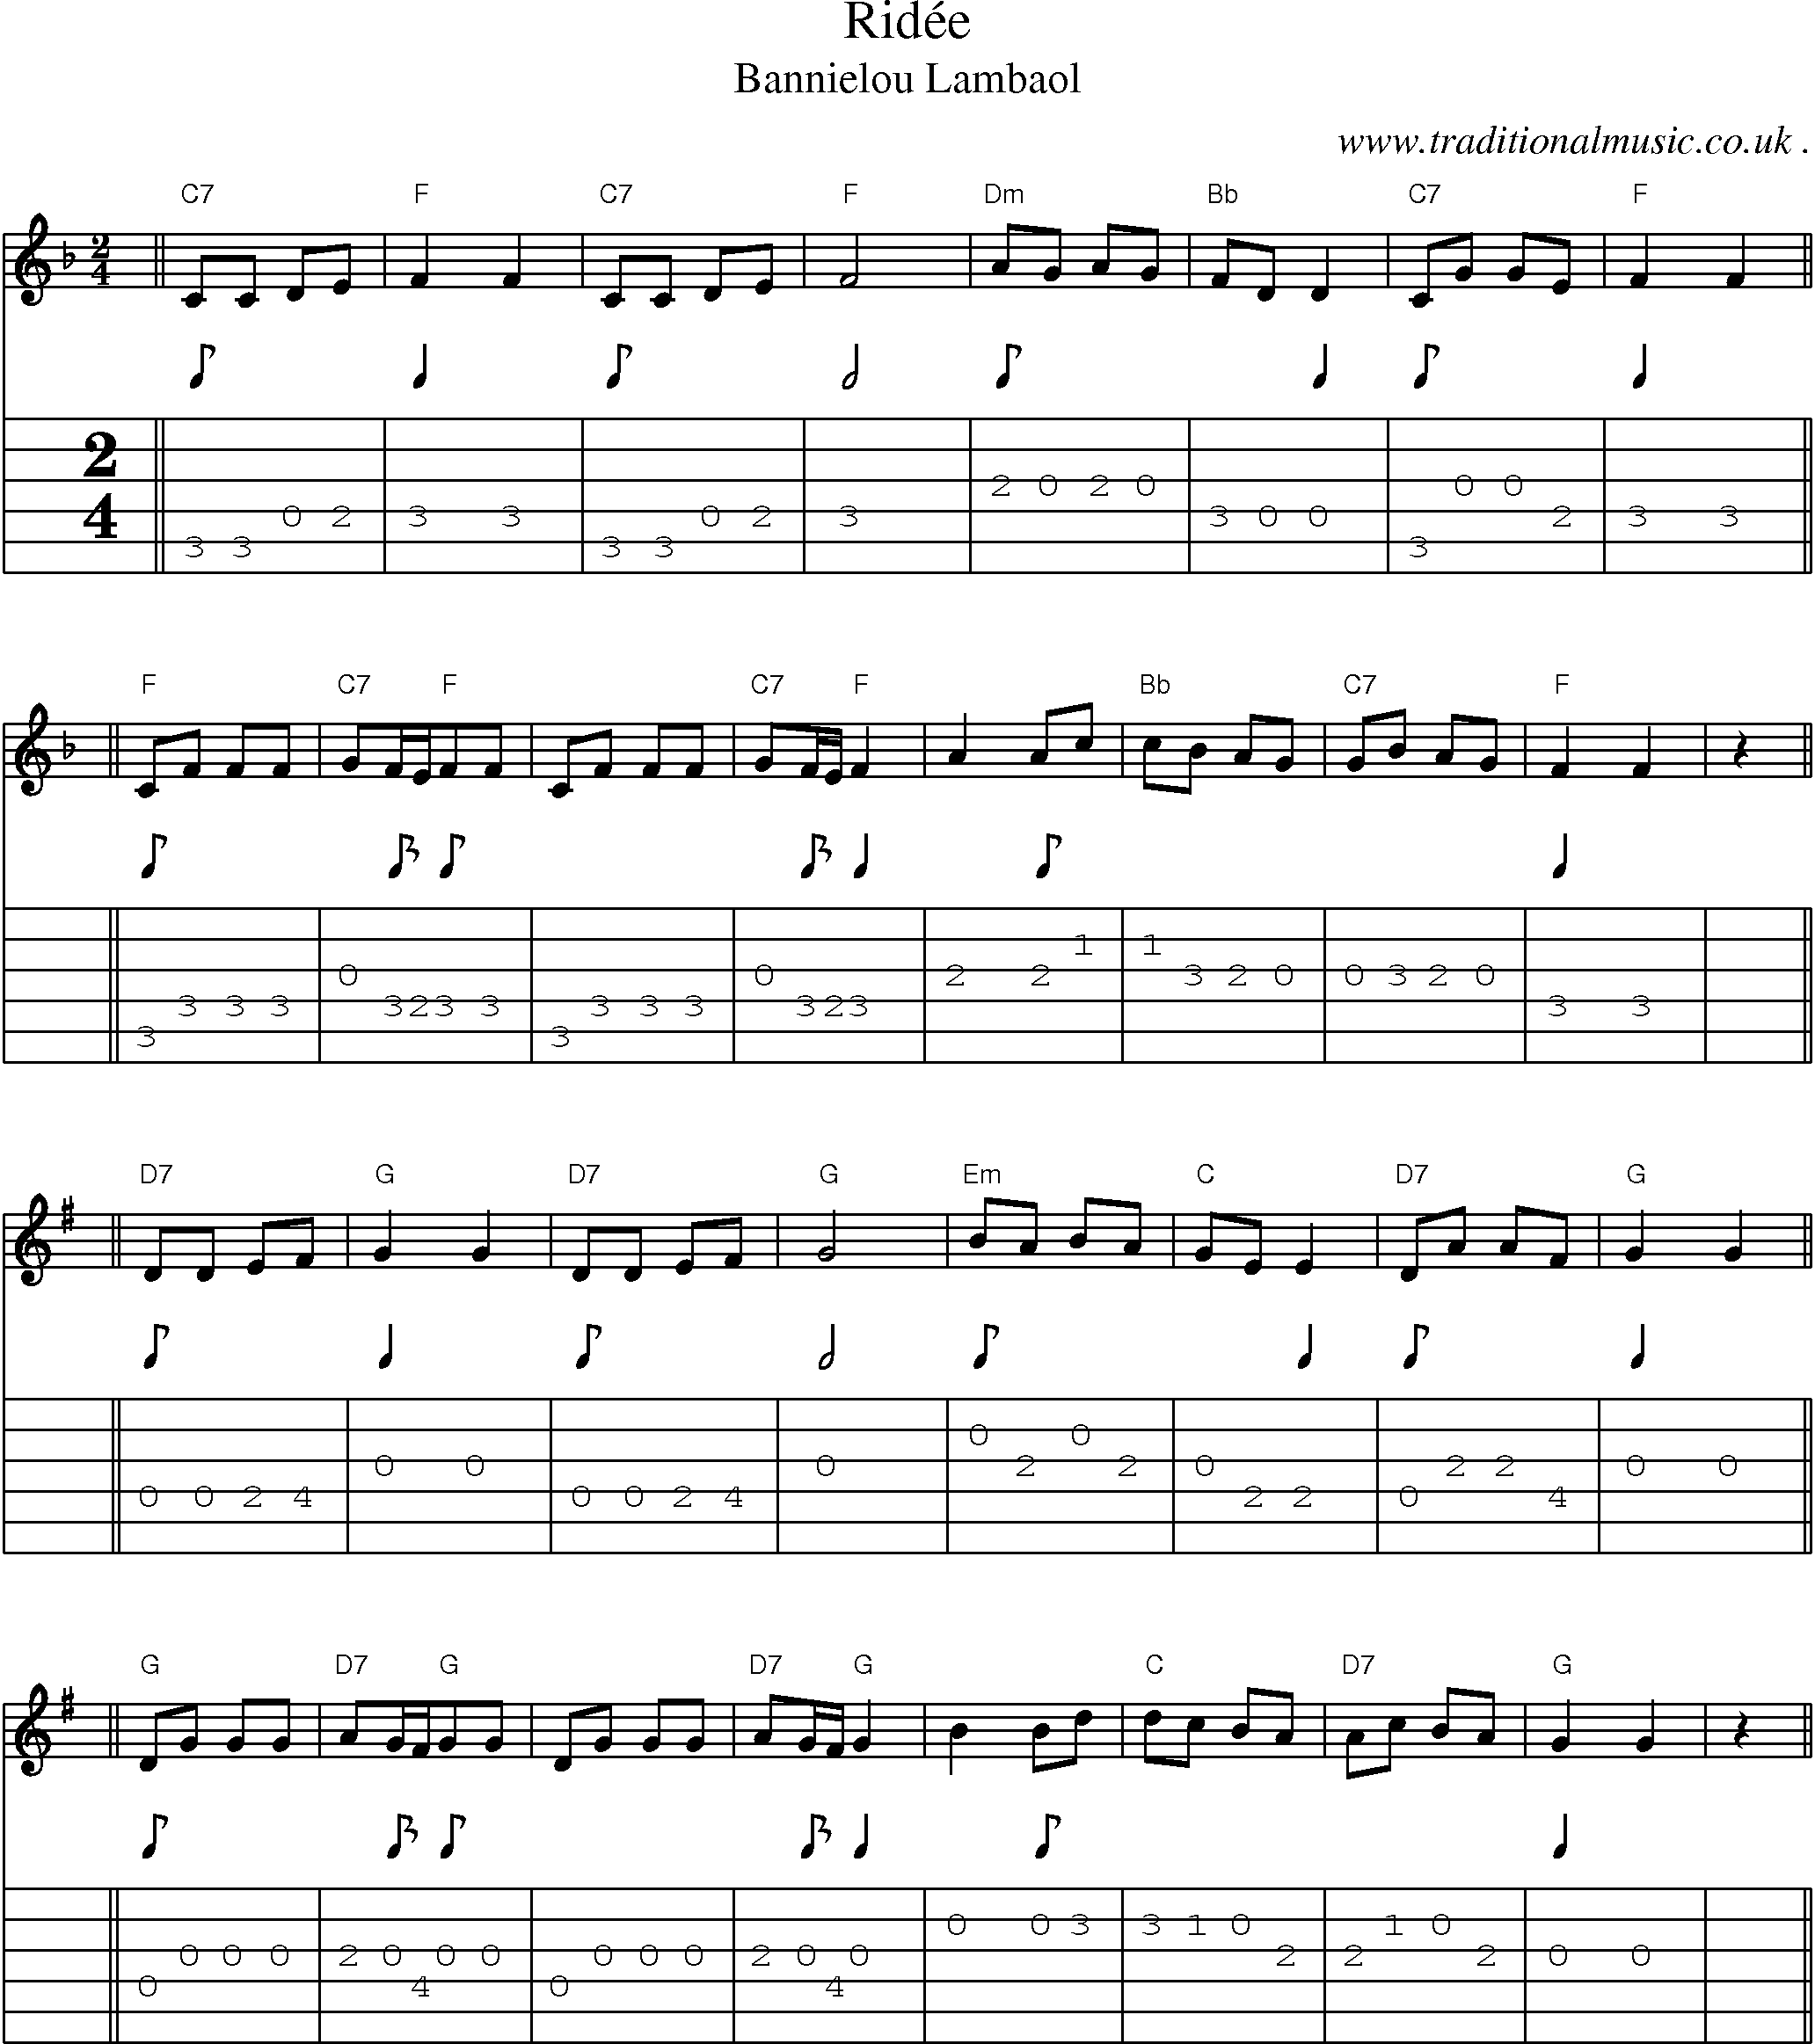 Sheet-Music and Guitar Tabs for Ridee